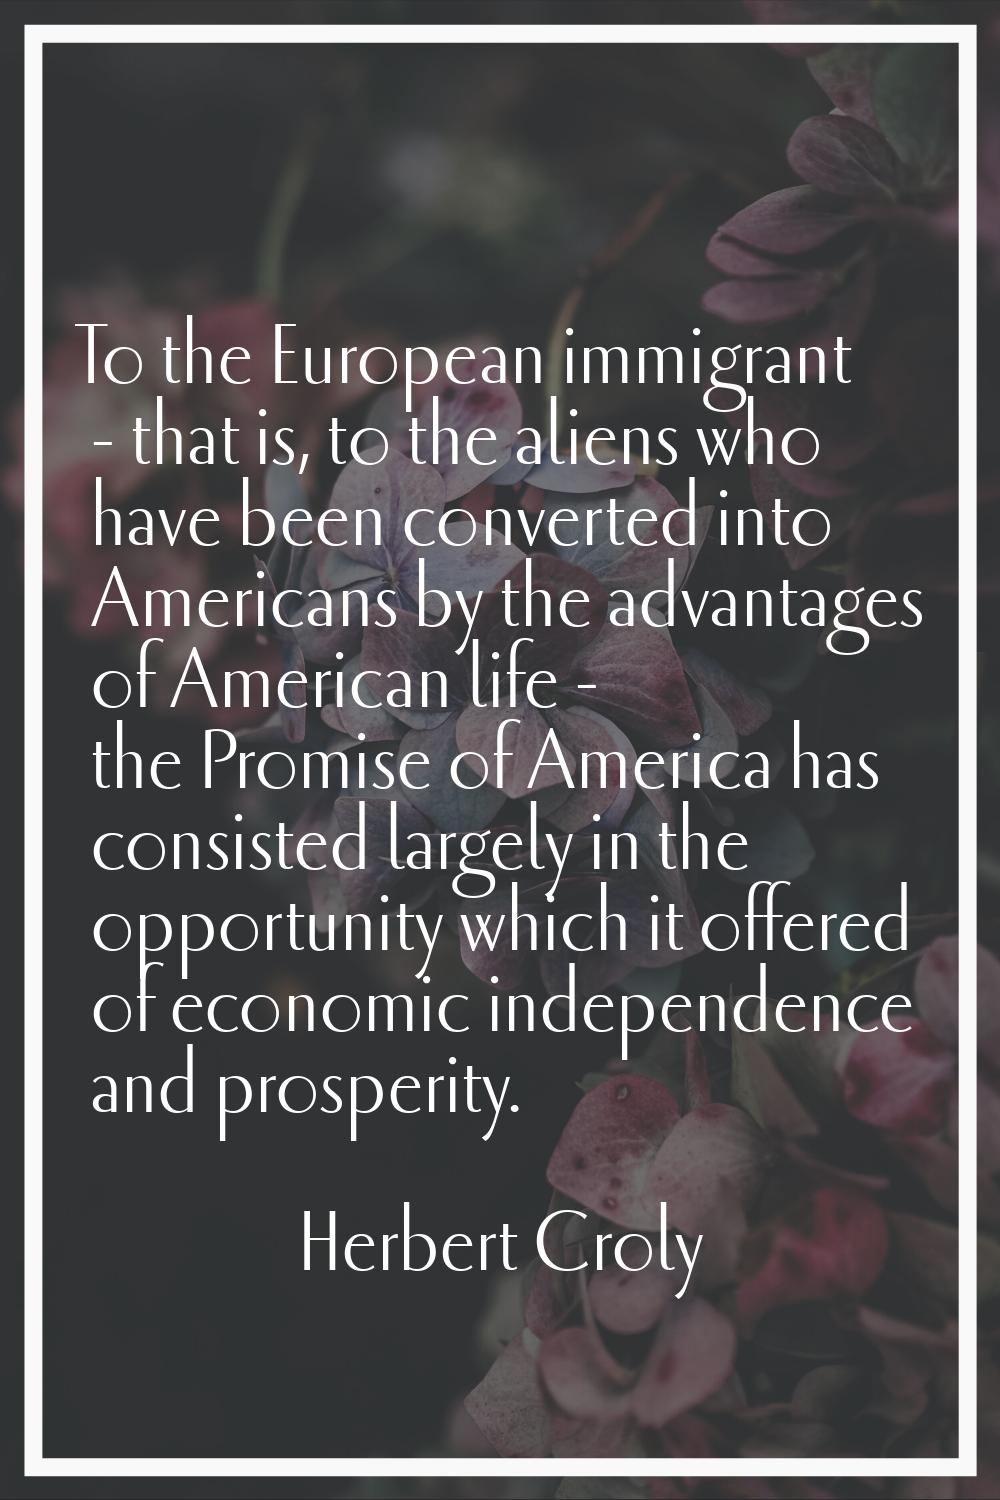 To the European immigrant - that is, to the aliens who have been converted into Americans by the ad